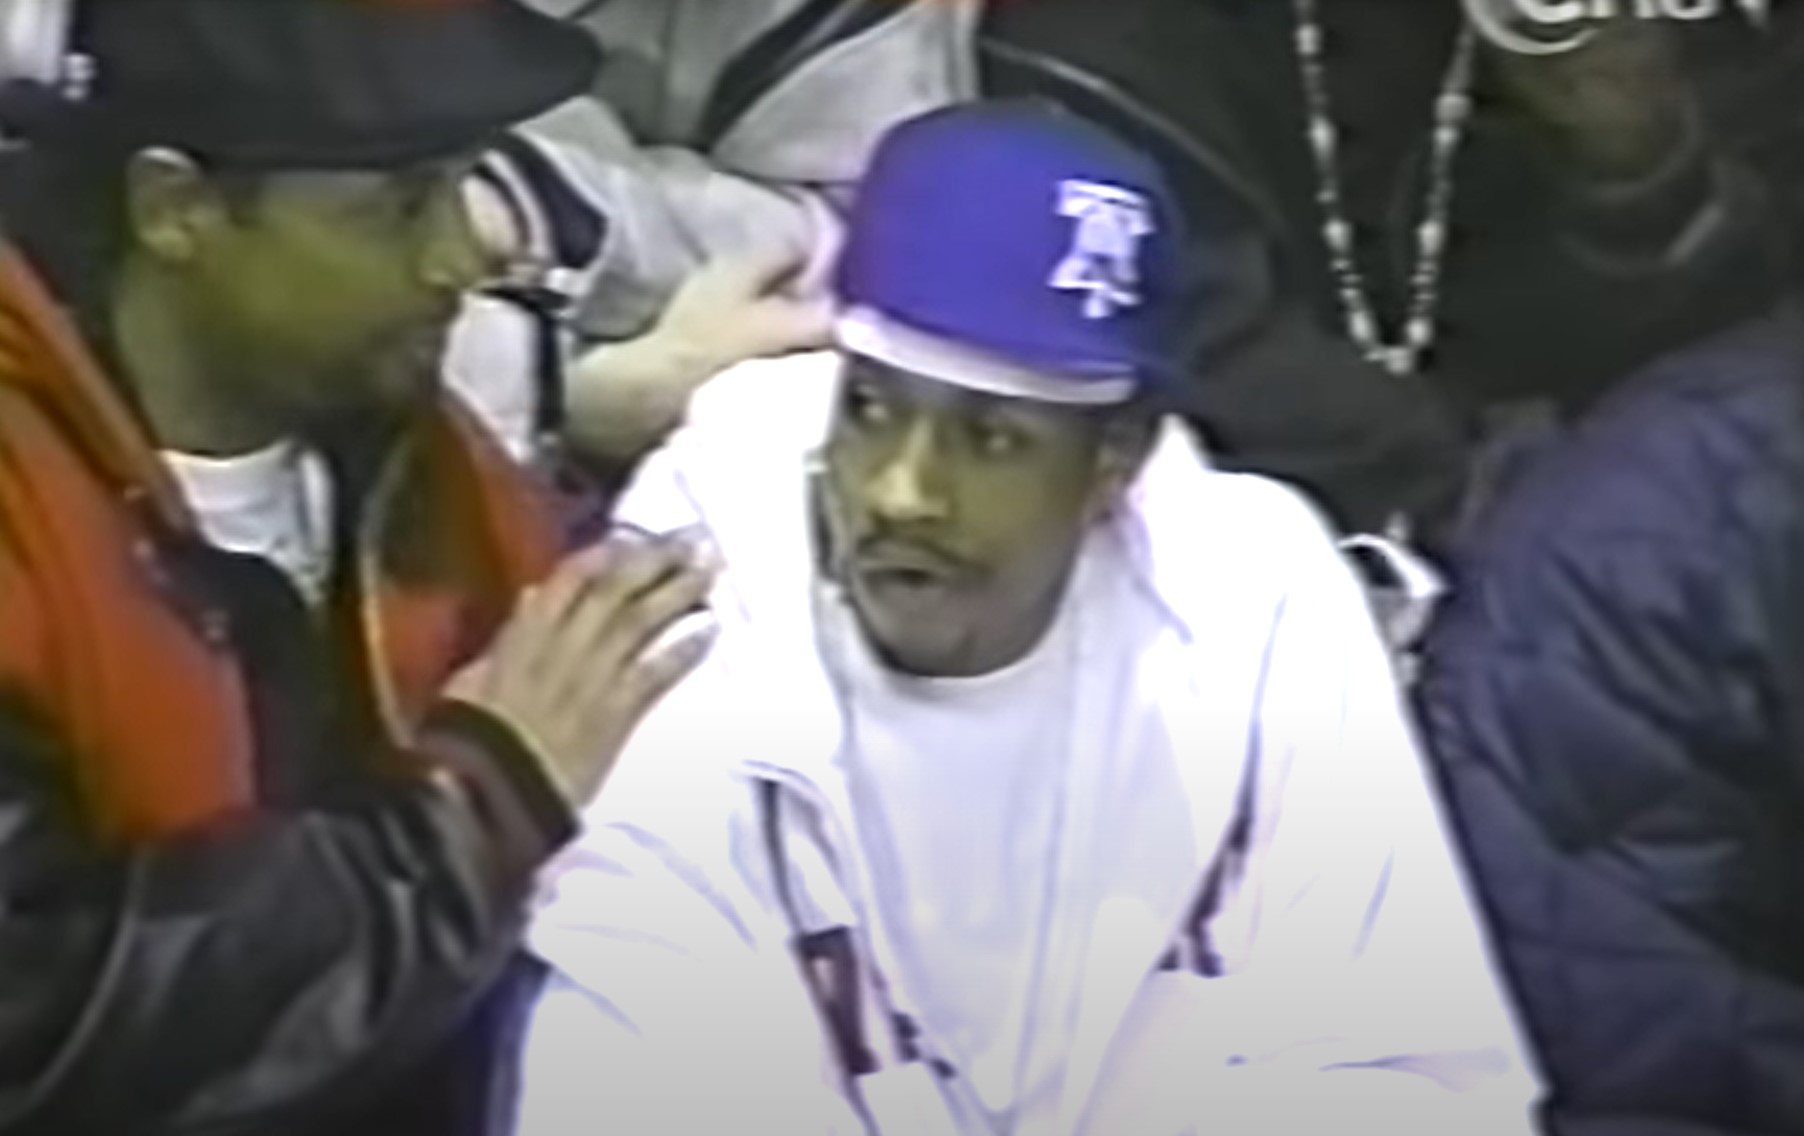 Allen Iverson watches LeBron James play from the stands.